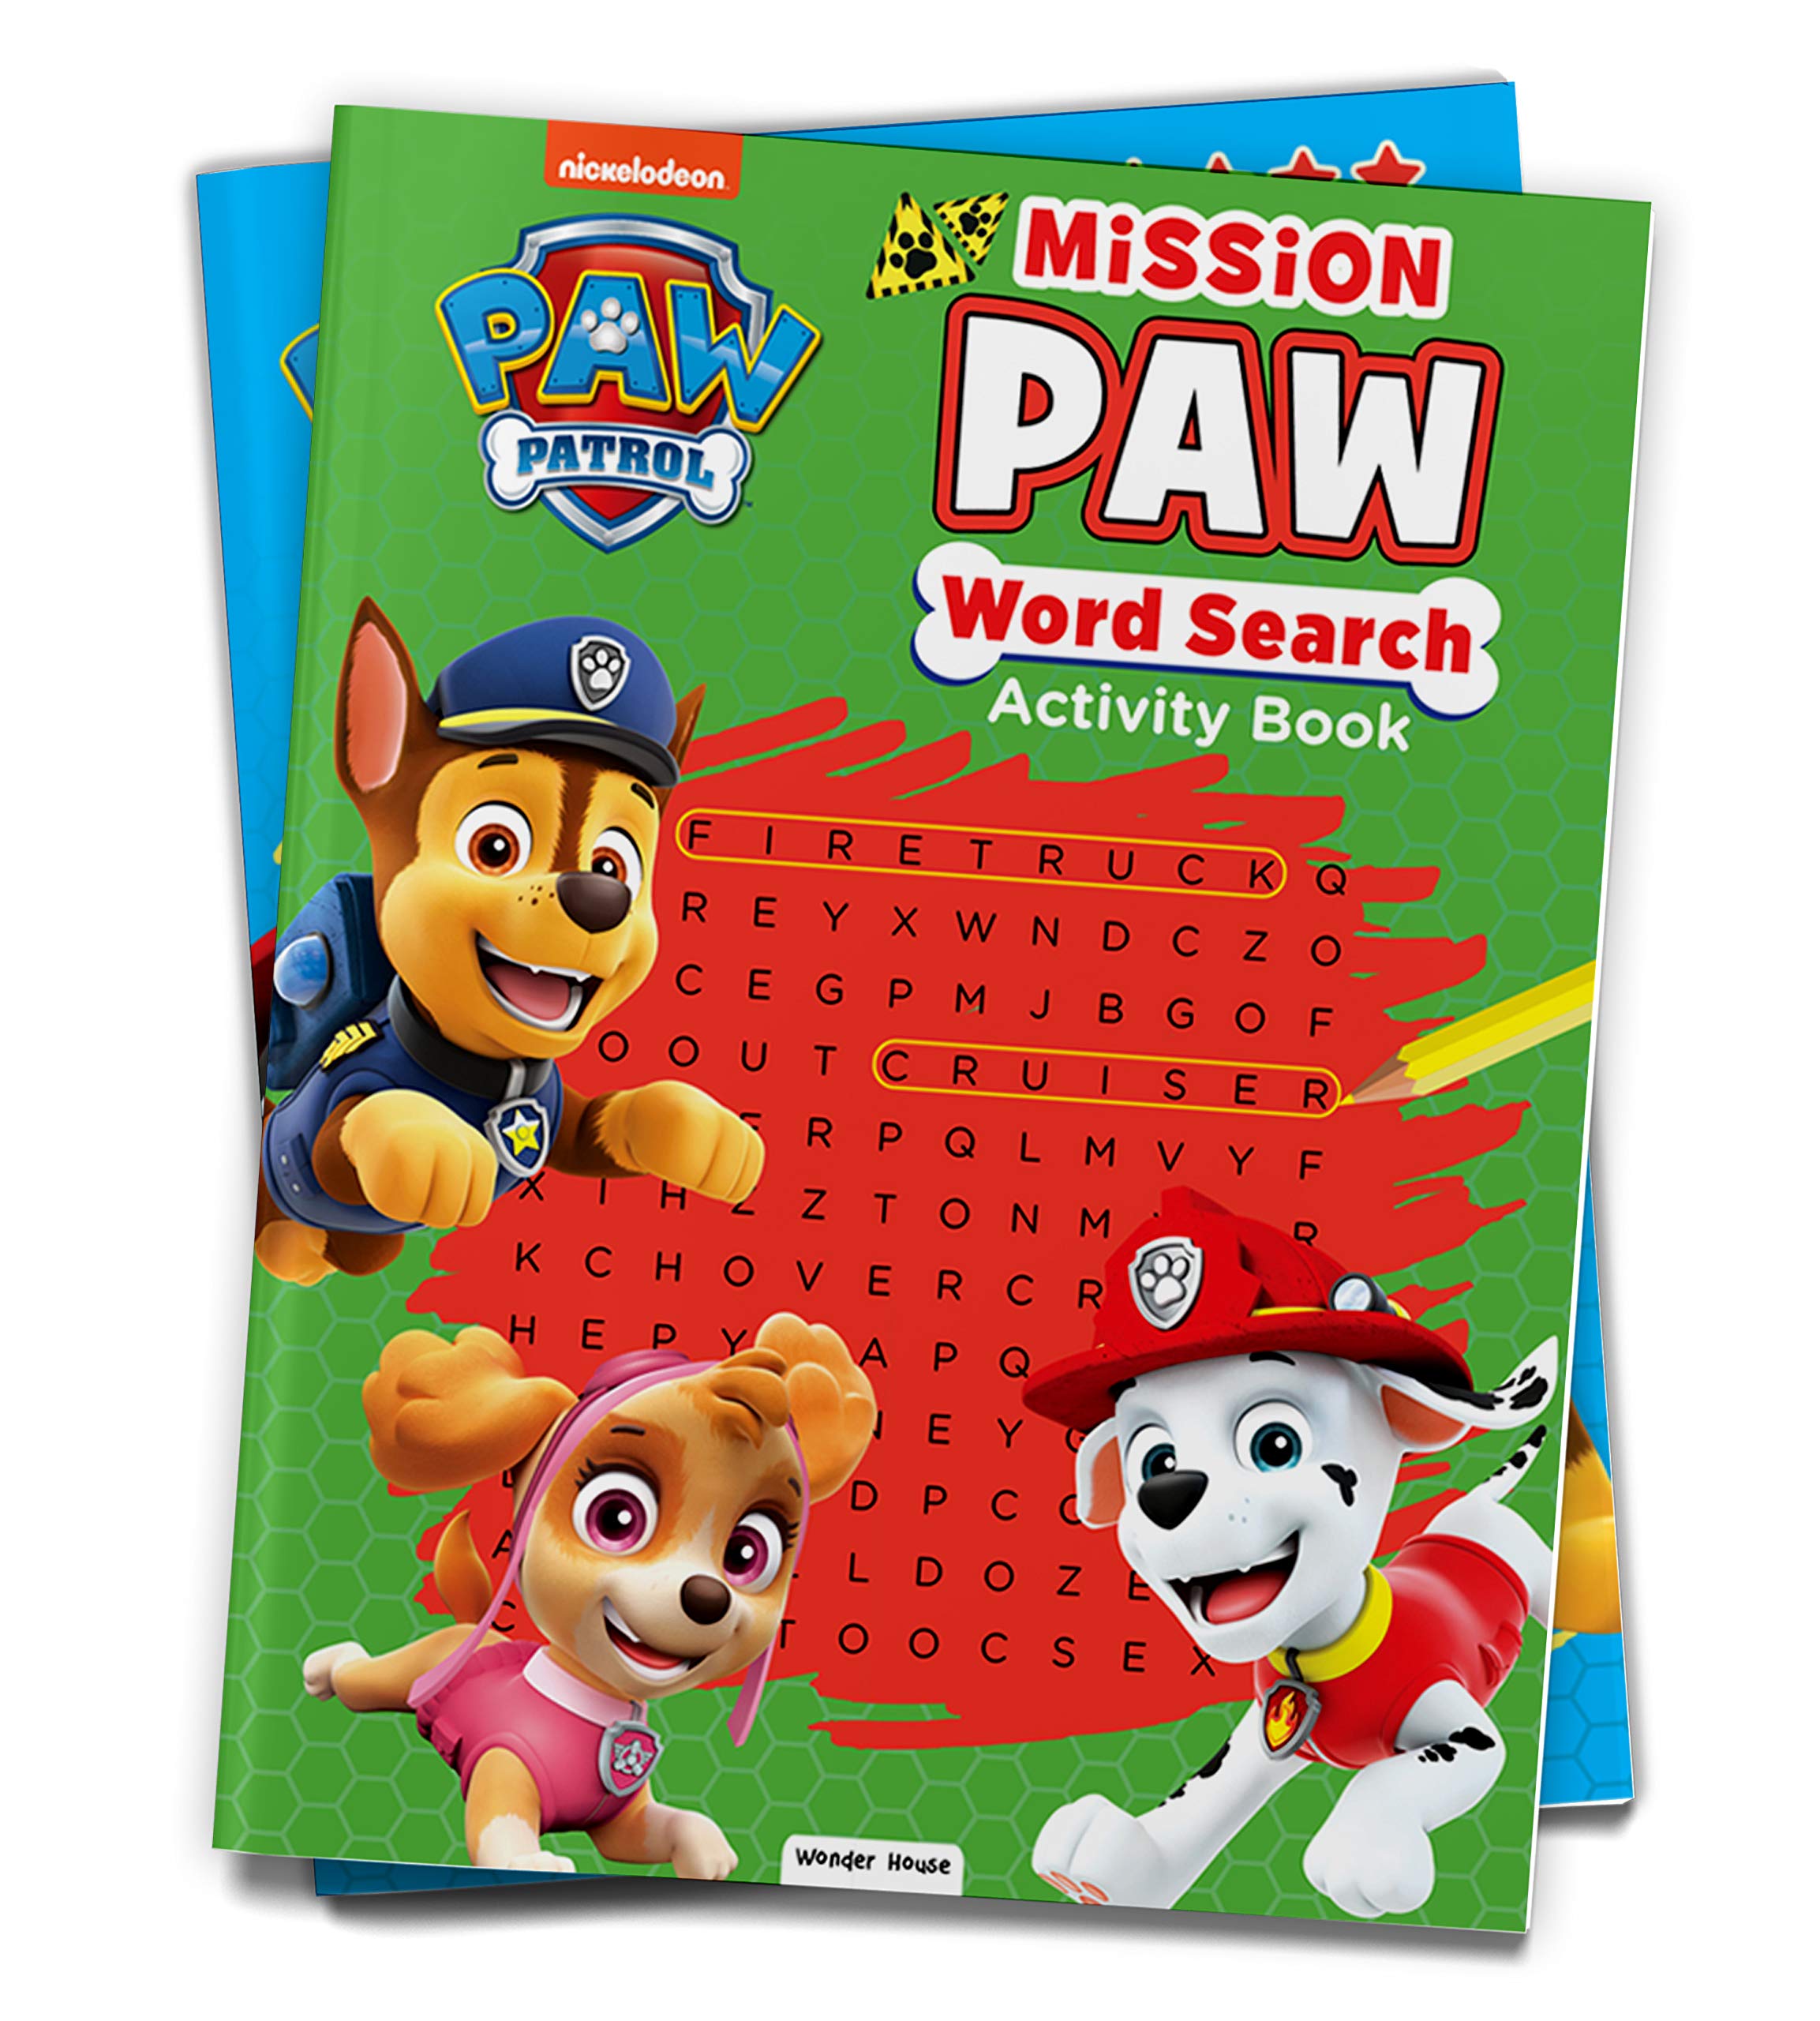 Paw Patrol Mission Paw Word Search Activity Book